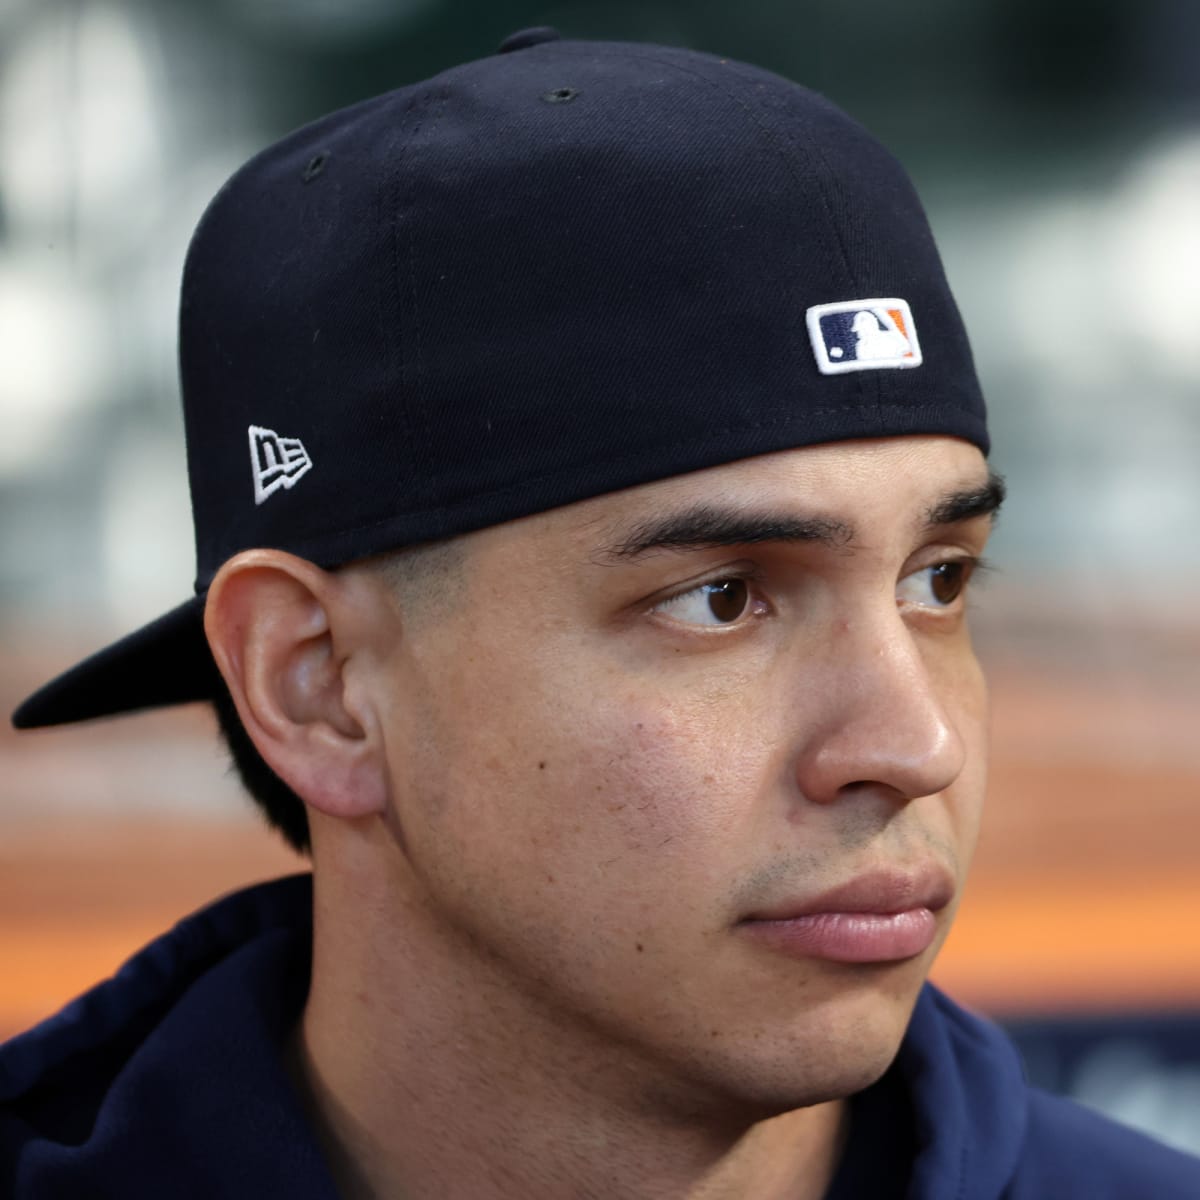 Mauricio Dubon Reminds Everyone Of Just Who the Astros Are — Baseball's  Most Joyful Player Is Impossible Not to Appreciate and He May Have the  Champs Back on Track